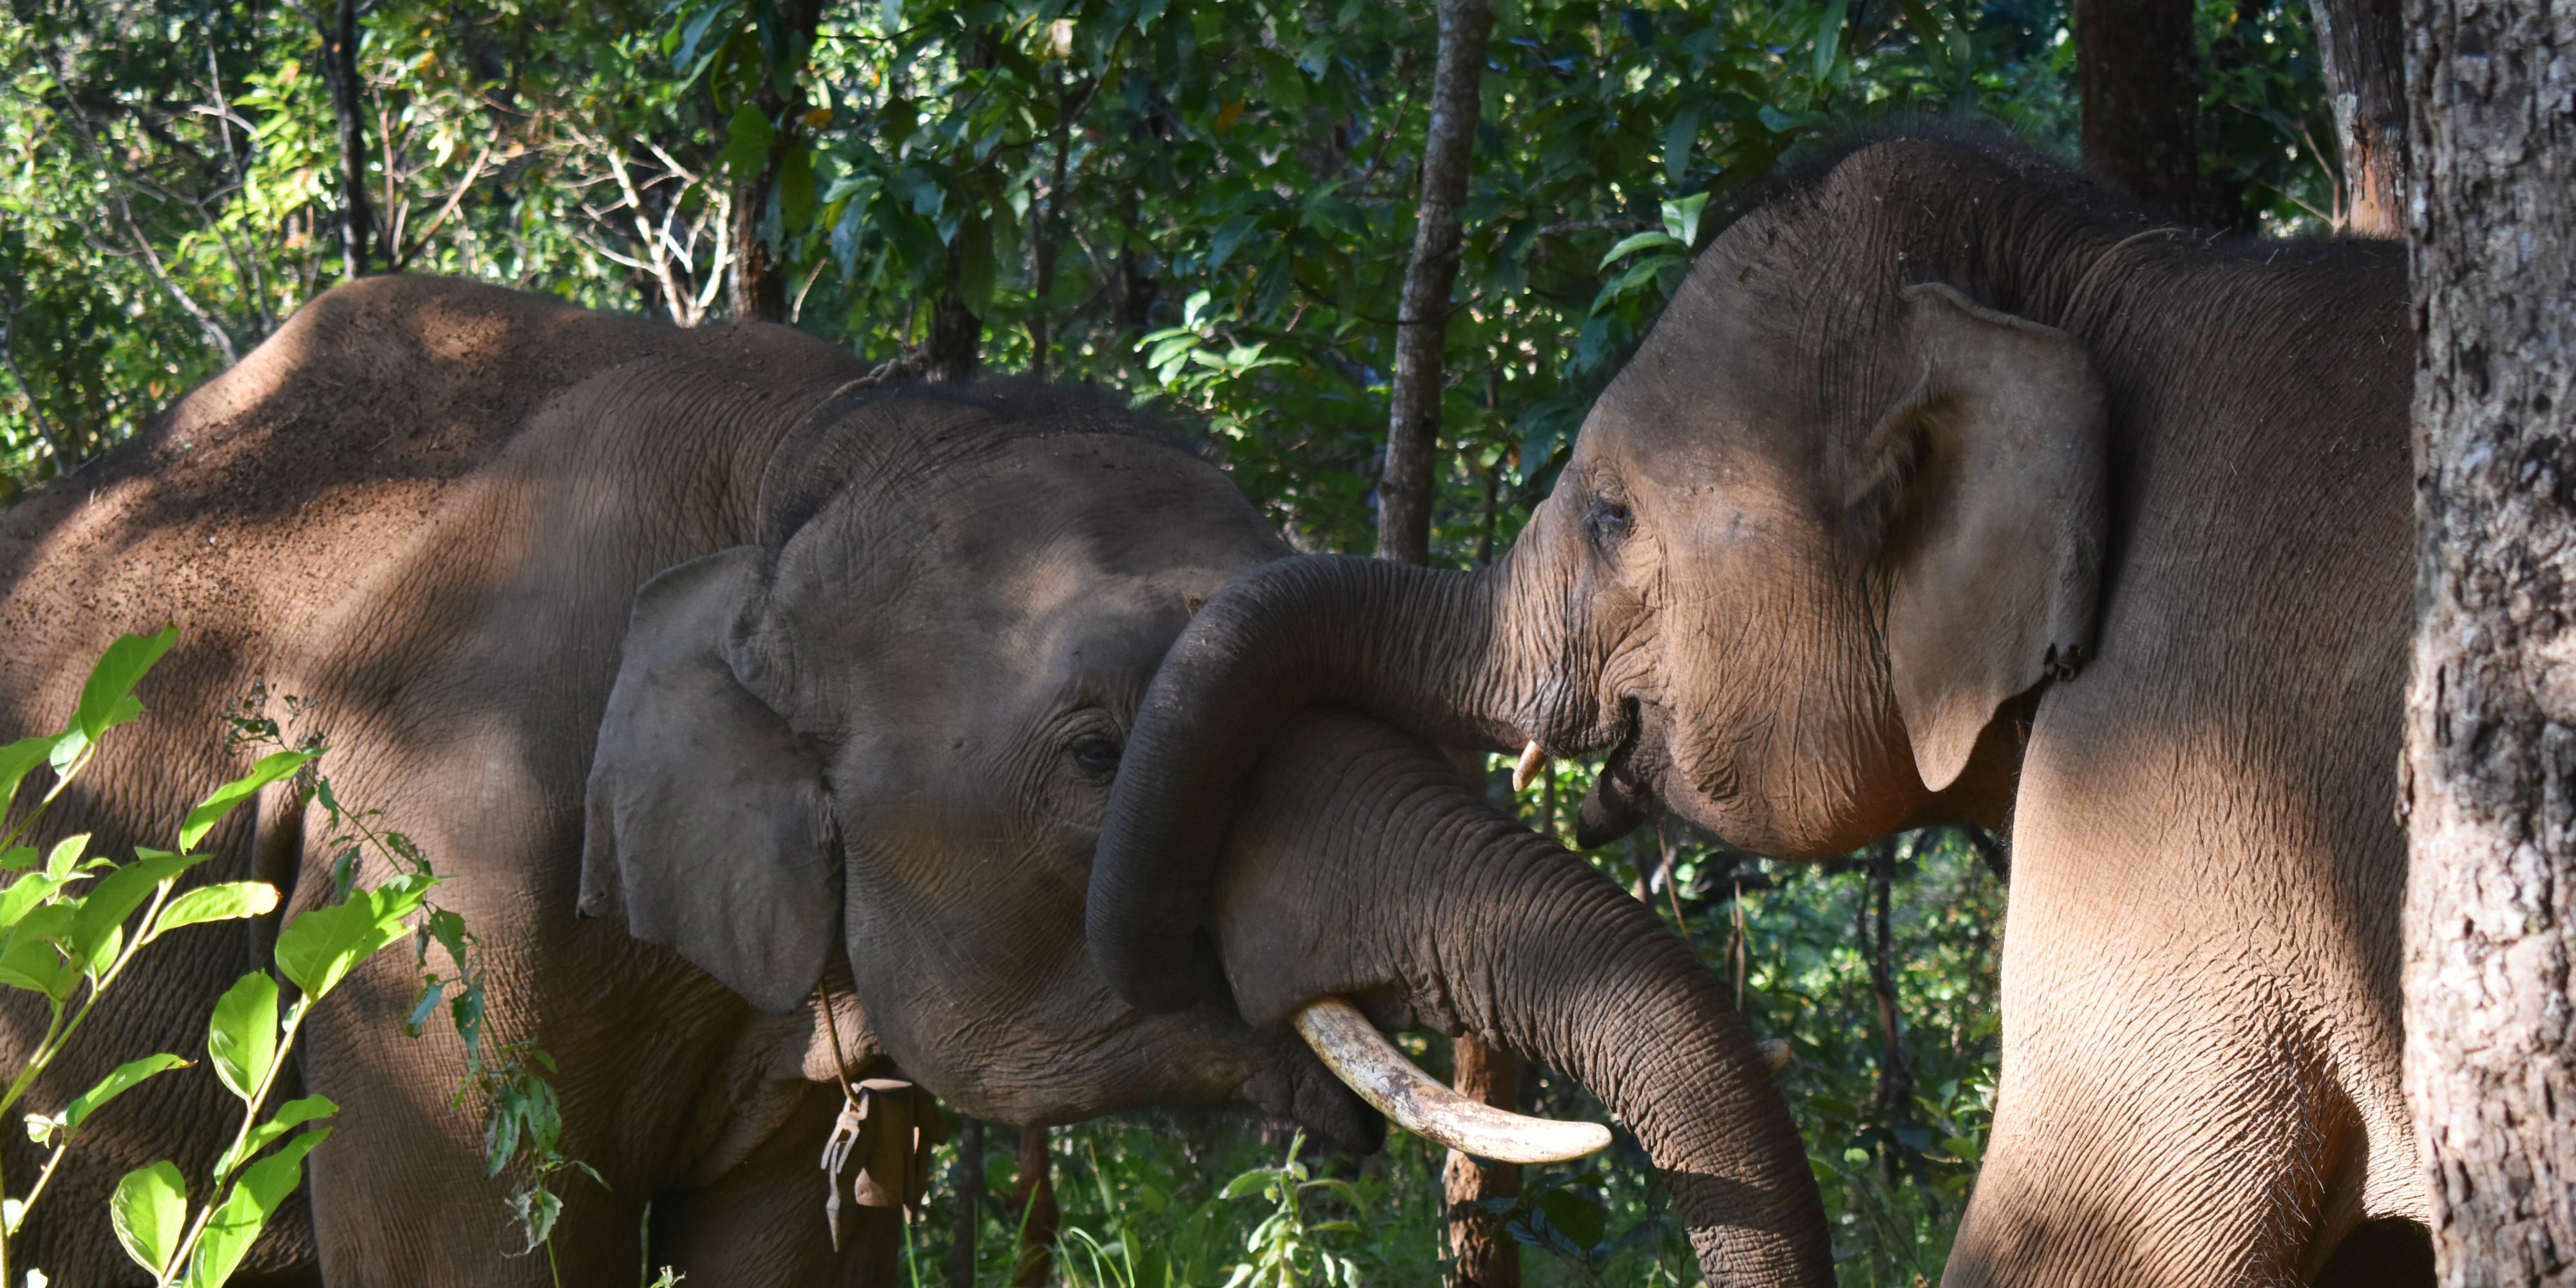 An elephant wraps its trunk around a companion. While volunteering with elephants in Thailand, GVI participants are able to witness this kind of natural behaviour first-hand.